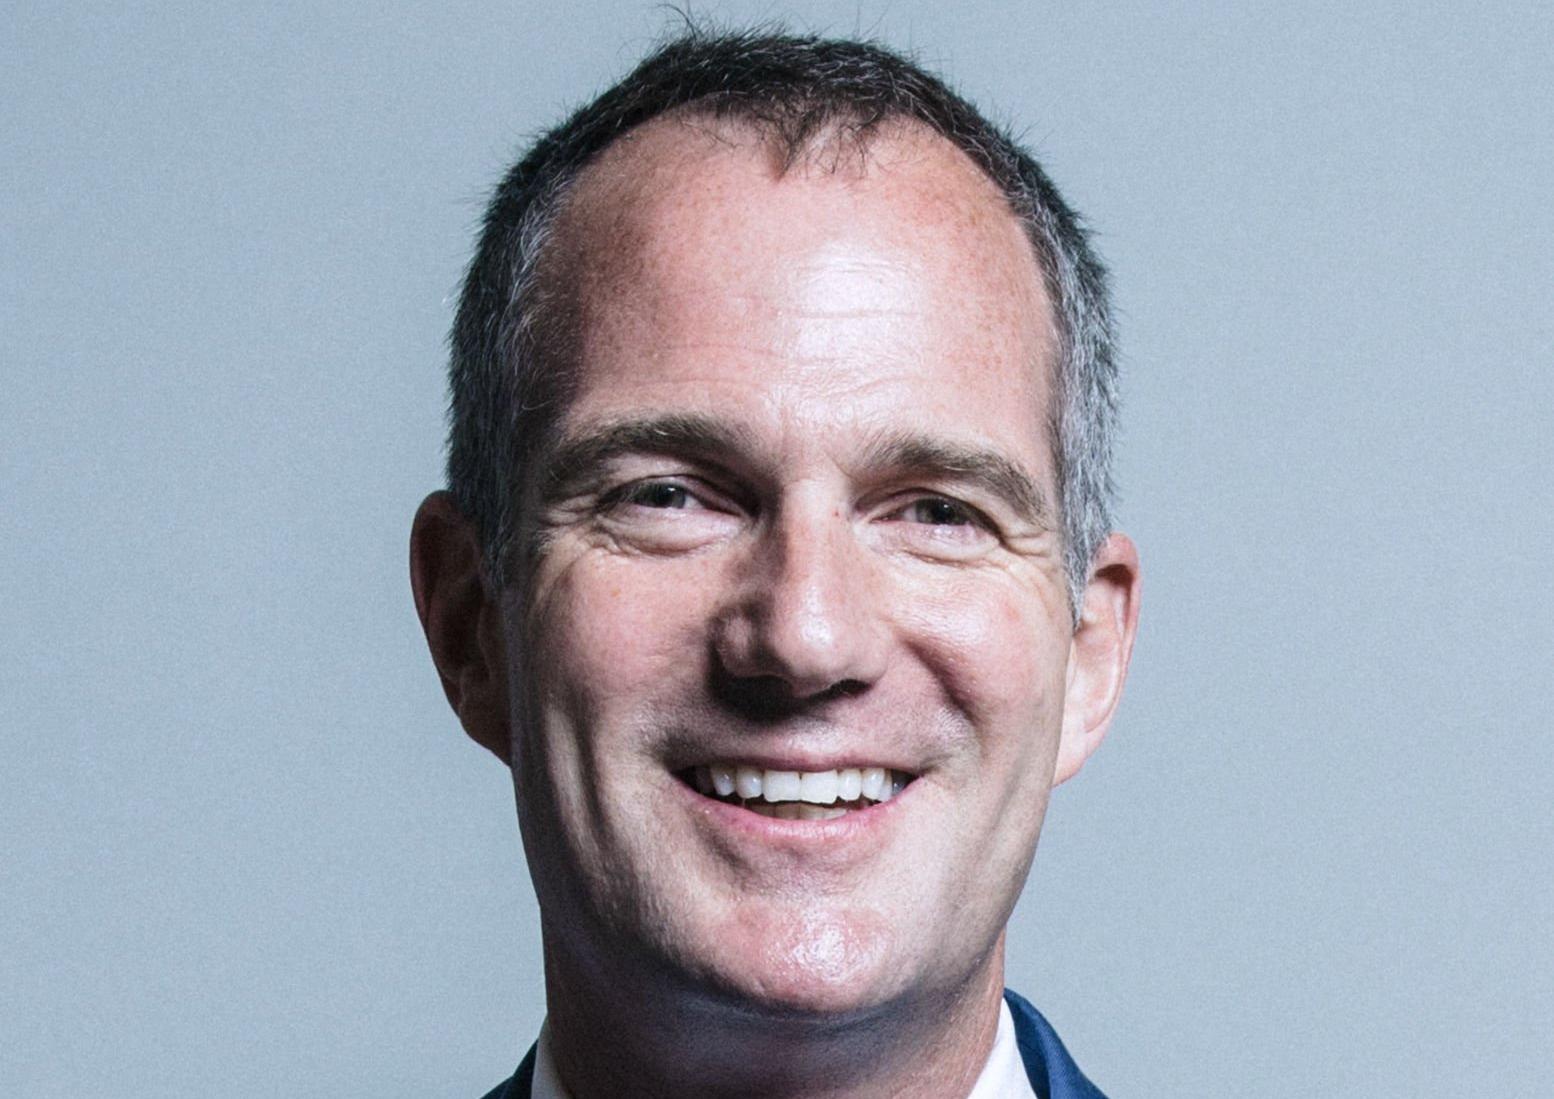 Labour's Peter Kyle was re-elected in Hove